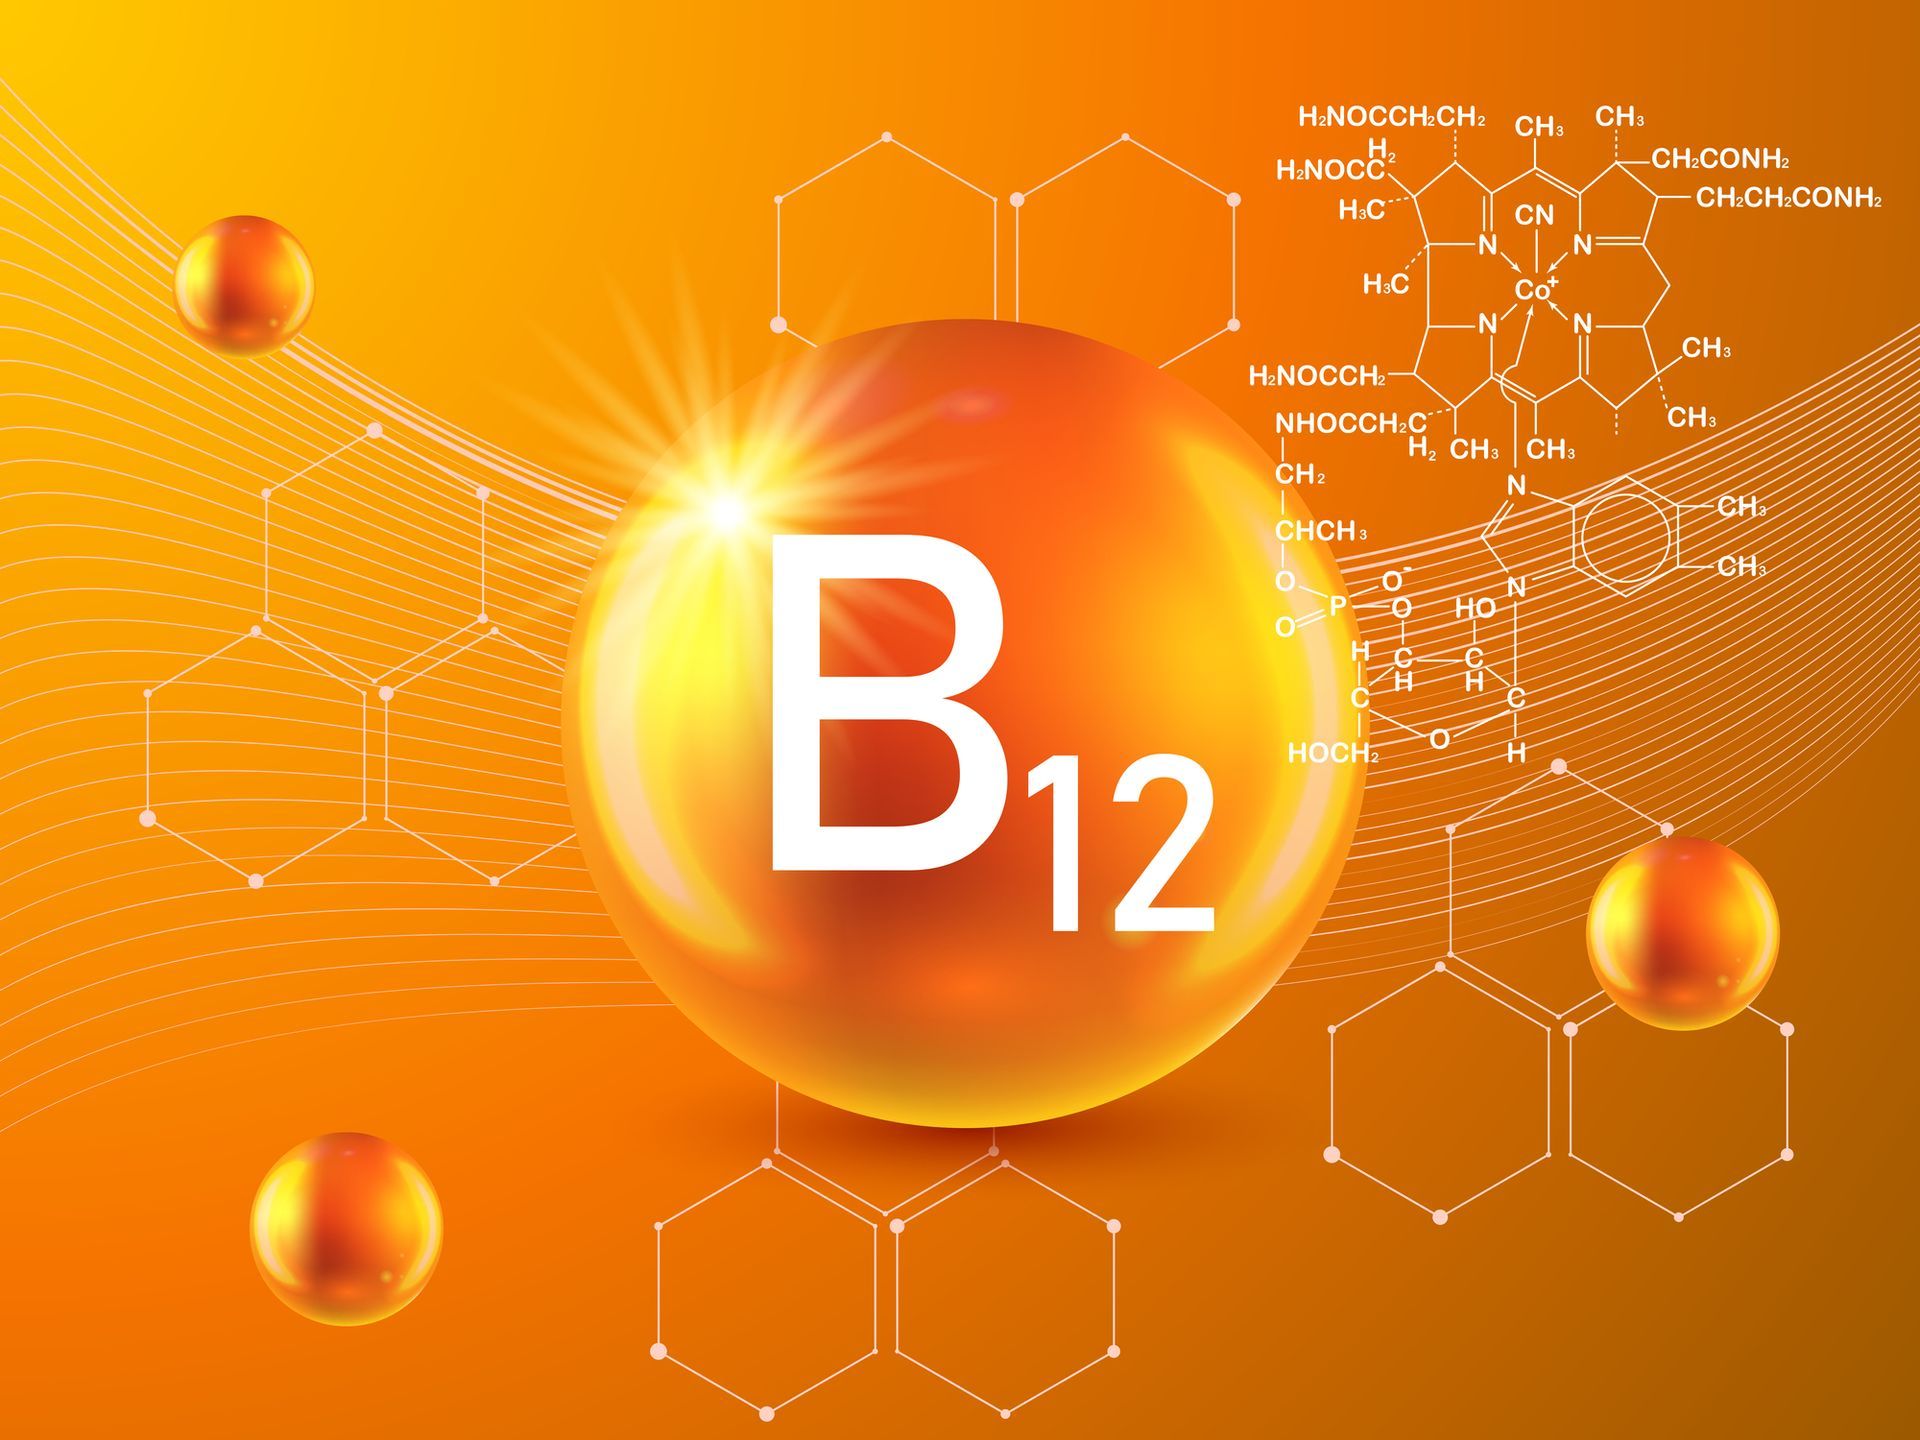 A sphere of vitamin b12 on a yellow background with chemical formulas.